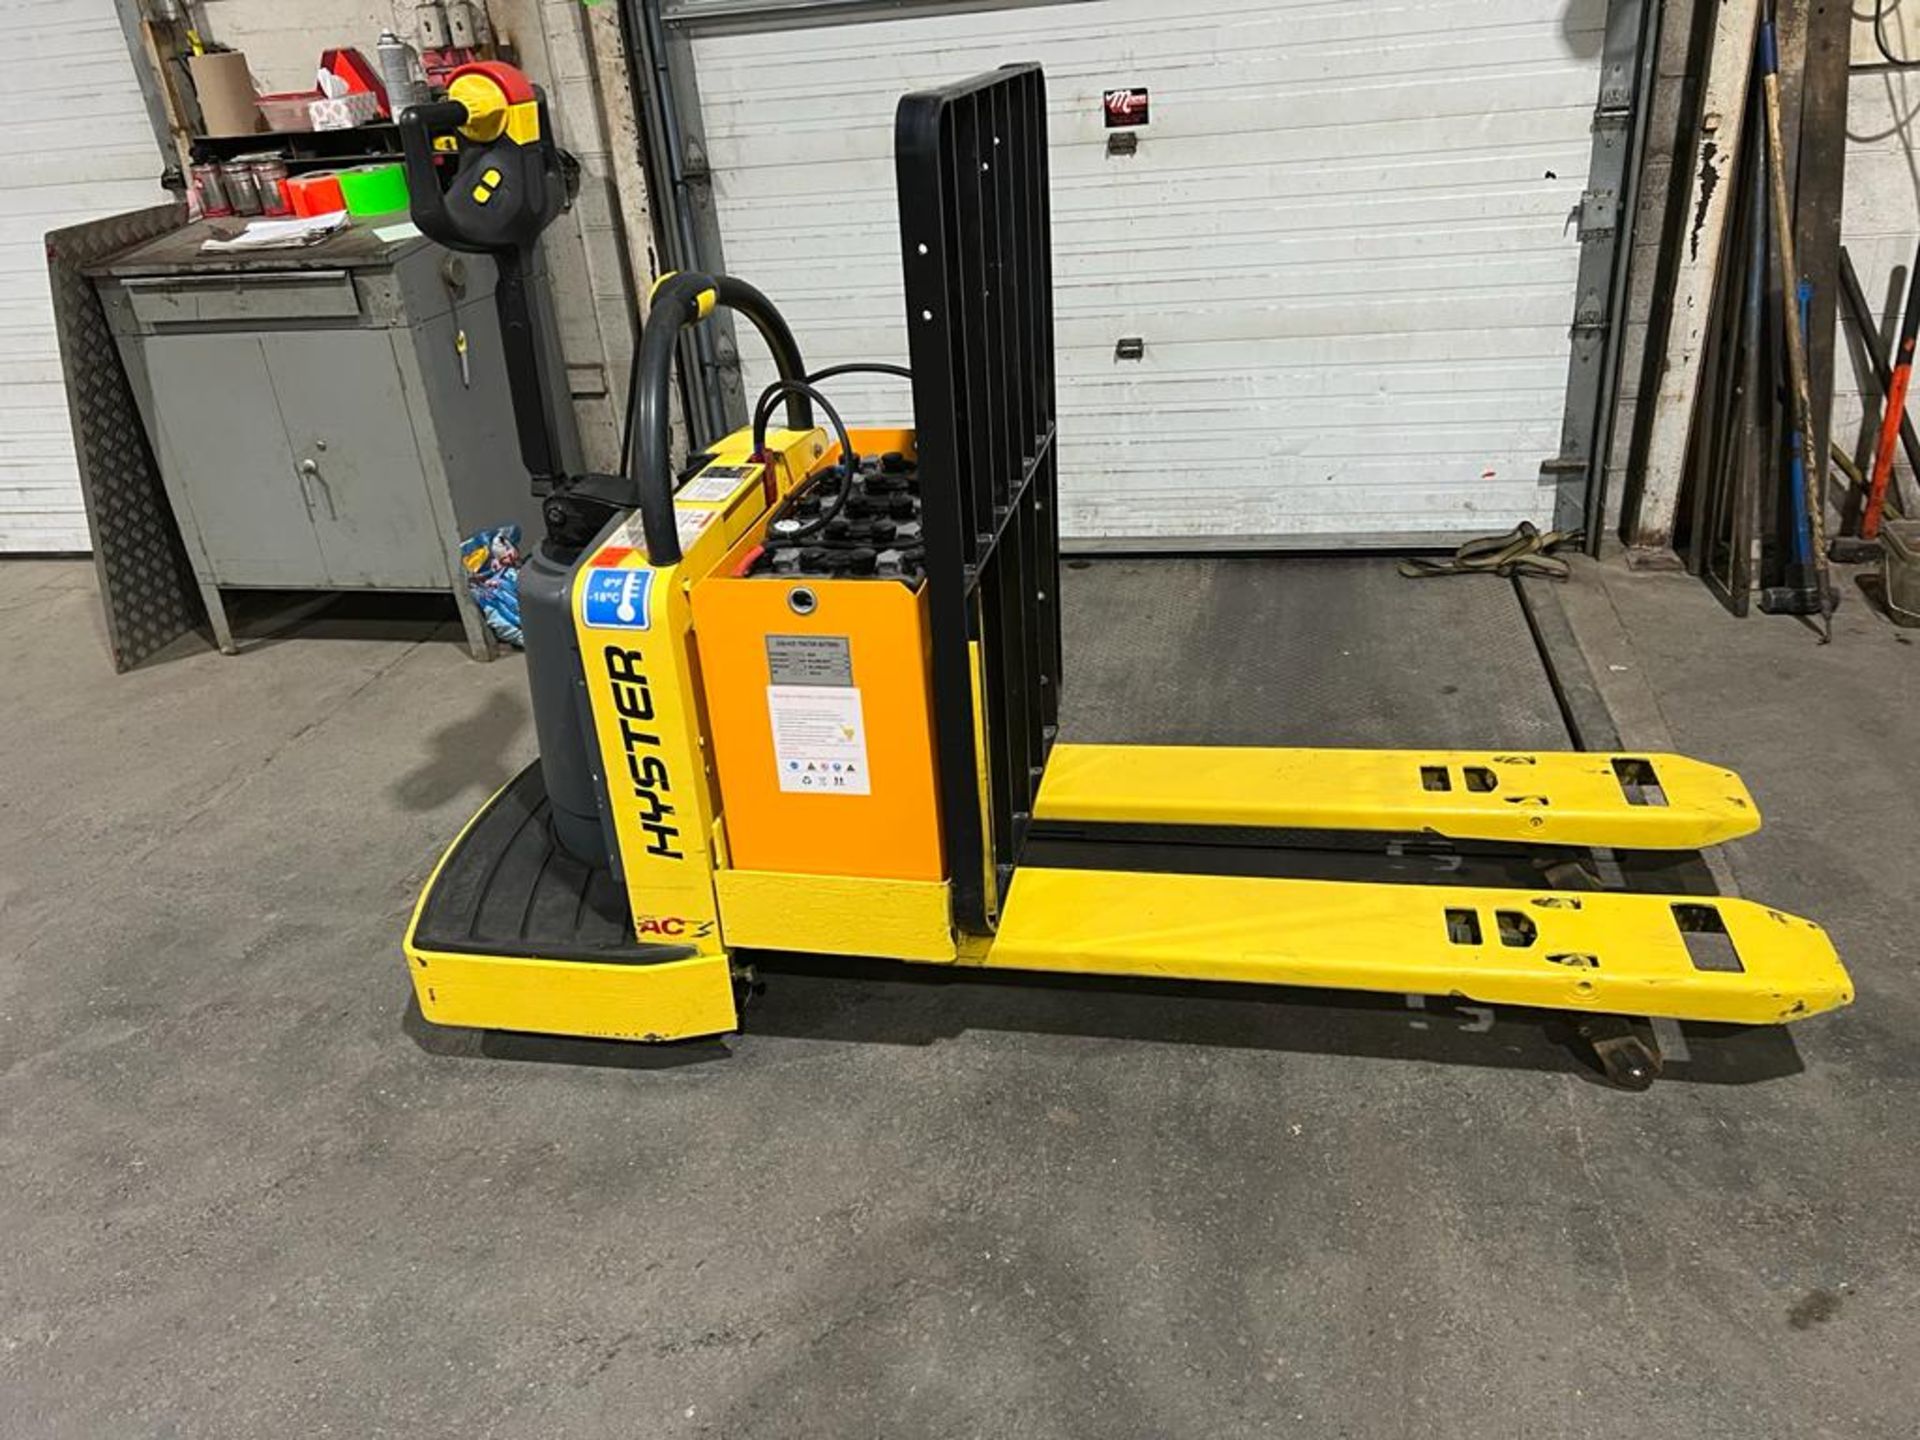 2010 Hyster RIDE ON 6000lbs capacity 24V NEW BATTERY Powered Pallet Cart Lift Ride on